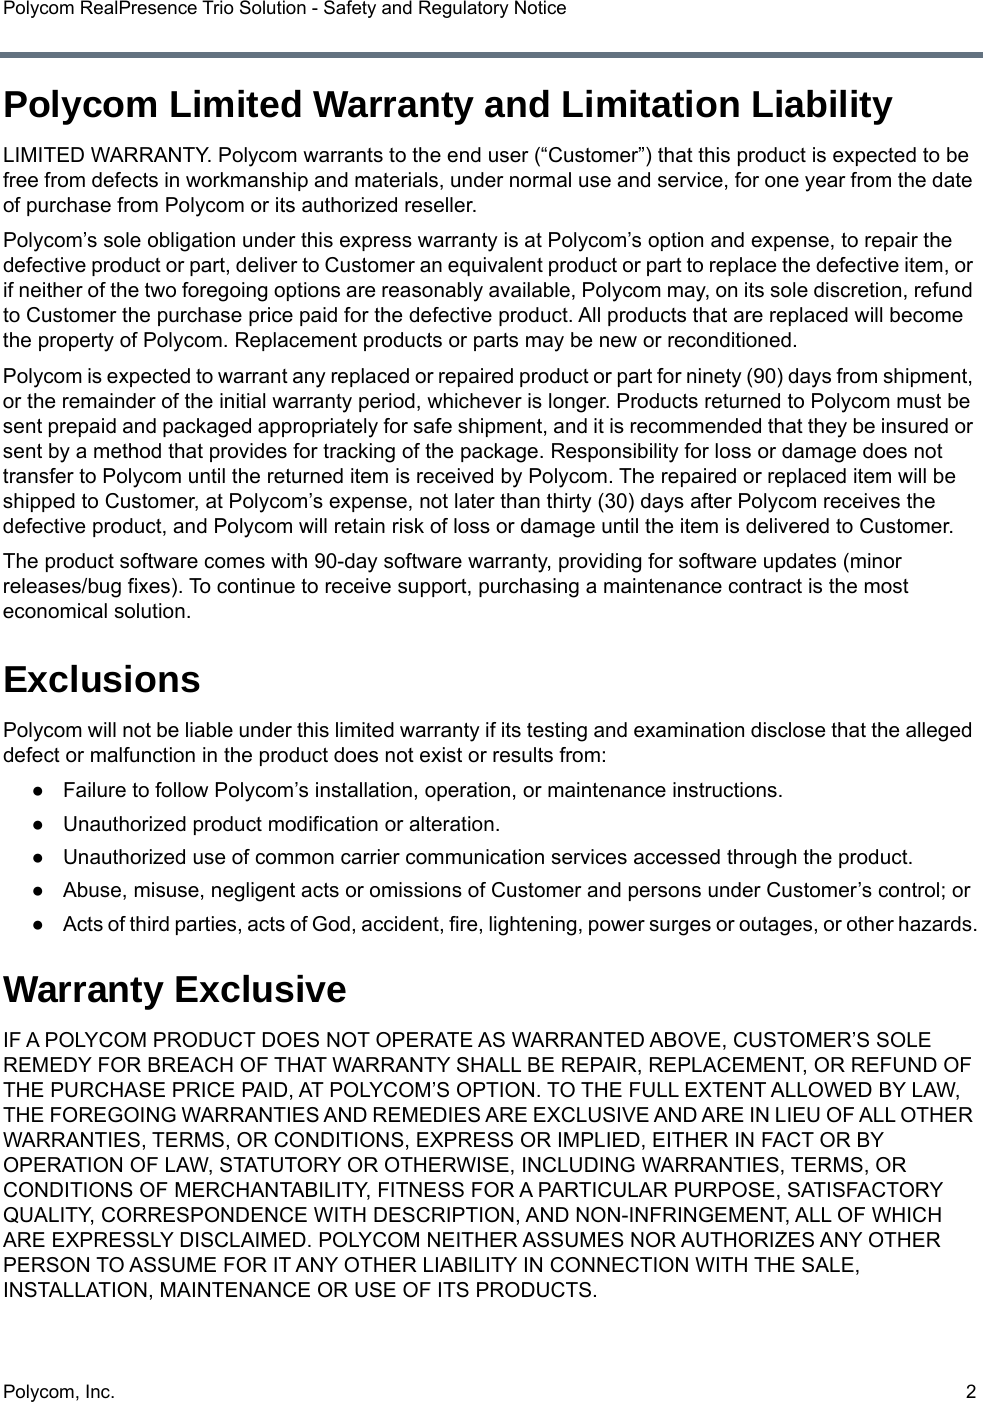 Polycom, Inc.  2Polycom RealPresence Trio Solution - Safety and Regulatory NoticePolycom Limited Warranty and Limitation LiabilityLIMITED WARRANTY. Polycom warrants to the end user (“Customer”) that this product is expected to be free from defects in workmanship and materials, under normal use and service, for one year from the date of purchase from Polycom or its authorized reseller. Polycom’s sole obligation under this express warranty is at Polycom’s option and expense, to repair the defective product or part, deliver to Customer an equivalent product or part to replace the defective item, or if neither of the two foregoing options are reasonably available, Polycom may, on its sole discretion, refund to Customer the purchase price paid for the defective product. All products that are replaced will become the property of Polycom. Replacement products or parts may be new or reconditioned.Polycom is expected to warrant any replaced or repaired product or part for ninety (90) days from shipment, or the remainder of the initial warranty period, whichever is longer. Products returned to Polycom must be sent prepaid and packaged appropriately for safe shipment, and it is recommended that they be insured or sent by a method that provides for tracking of the package. Responsibility for loss or damage does not transfer to Polycom until the returned item is received by Polycom. The repaired or replaced item will be shipped to Customer, at Polycom’s expense, not later than thirty (30) days after Polycom receives the defective product, and Polycom will retain risk of loss or damage until the item is delivered to Customer.The product software comes with 90-day software warranty, providing for software updates (minor releases/bug fixes). To continue to receive support, purchasing a maintenance contract is the most economical solution.ExclusionsPolycom will not be liable under this limited warranty if its testing and examination disclose that the alleged defect or malfunction in the product does not exist or results from: ●Failure to follow Polycom’s installation, operation, or maintenance instructions.●Unauthorized product modification or alteration.●Unauthorized use of common carrier communication services accessed through the product.●Abuse, misuse, negligent acts or omissions of Customer and persons under Customer’s control; or●Acts of third parties, acts of God, accident, fire, lightening, power surges or outages, or other hazards.Warranty ExclusiveIF A POLYCOM PRODUCT DOES NOT OPERATE AS WARRANTED ABOVE, CUSTOMER’S SOLE REMEDY FOR BREACH OF THAT WARRANTY SHALL BE REPAIR, REPLACEMENT, OR REFUND OF THE PURCHASE PRICE PAID, AT POLYCOM’S OPTION. TO THE FULL EXTENT ALLOWED BY LAW, THE FOREGOING WARRANTIES AND REMEDIES ARE EXCLUSIVE AND ARE IN LIEU OF ALL OTHER WARRANTIES, TERMS, OR CONDITIONS, EXPRESS OR IMPLIED, EITHER IN FACT OR BY OPERATION OF LAW, STATUTORY OR OTHERWISE, INCLUDING WARRANTIES, TERMS, OR CONDITIONS OF MERCHANTABILITY, FITNESS FOR A PARTICULAR PURPOSE, SATISFACTORY QUALITY, CORRESPONDENCE WITH DESCRIPTION, AND NON-INFRINGEMENT, ALL OF WHICH ARE EXPRESSLY DISCLAIMED. POLYCOM NEITHER ASSUMES NOR AUTHORIZES ANY OTHER PERSON TO ASSUME FOR IT ANY OTHER LIABILITY IN CONNECTION WITH THE SALE, INSTALLATION, MAINTENANCE OR USE OF ITS PRODUCTS.